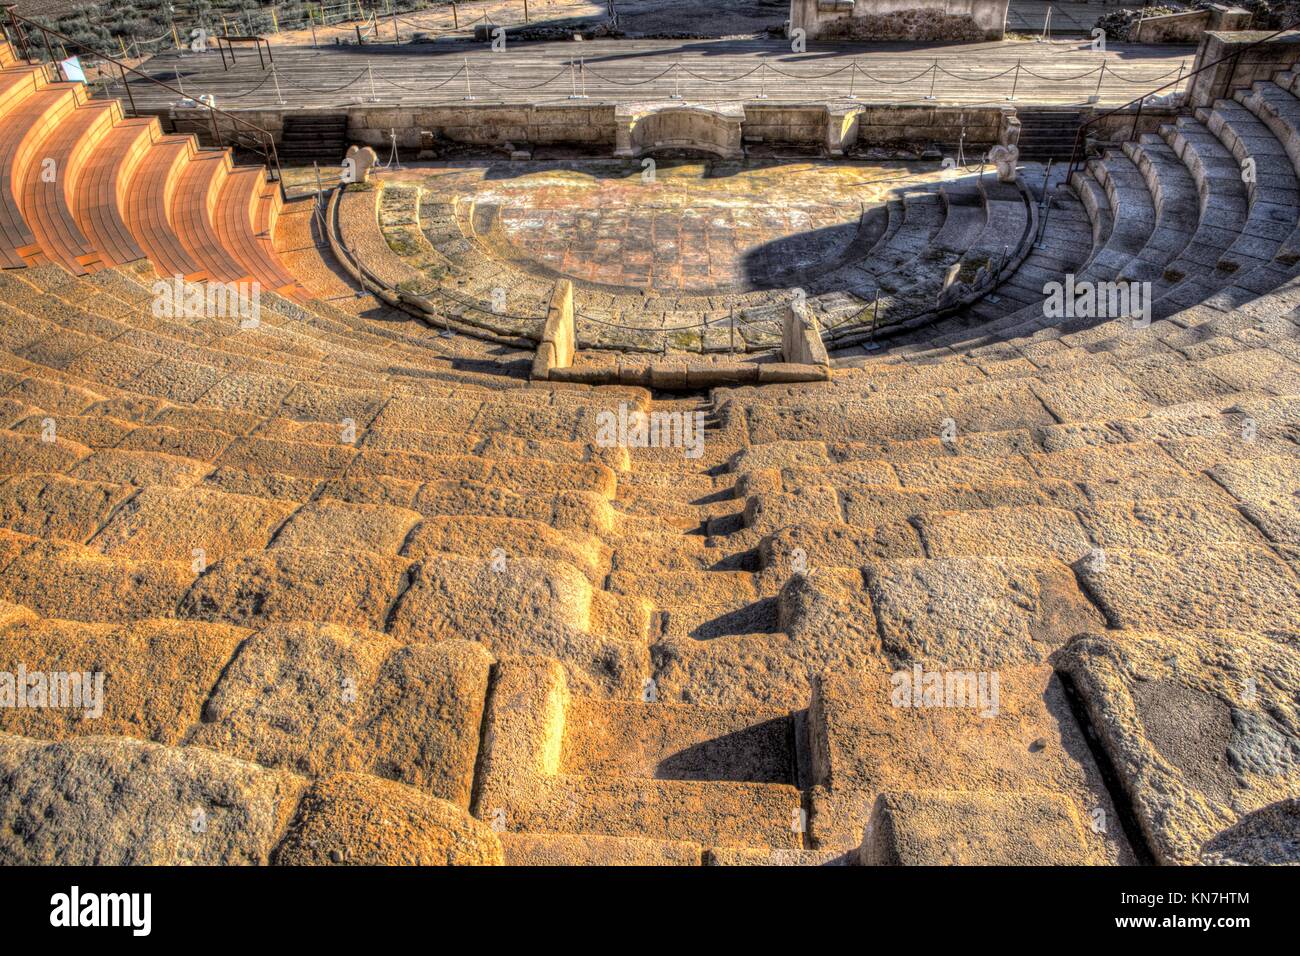 Roman theatre of Medellin, Spain. High view from grandstand to stage. Stock Photo